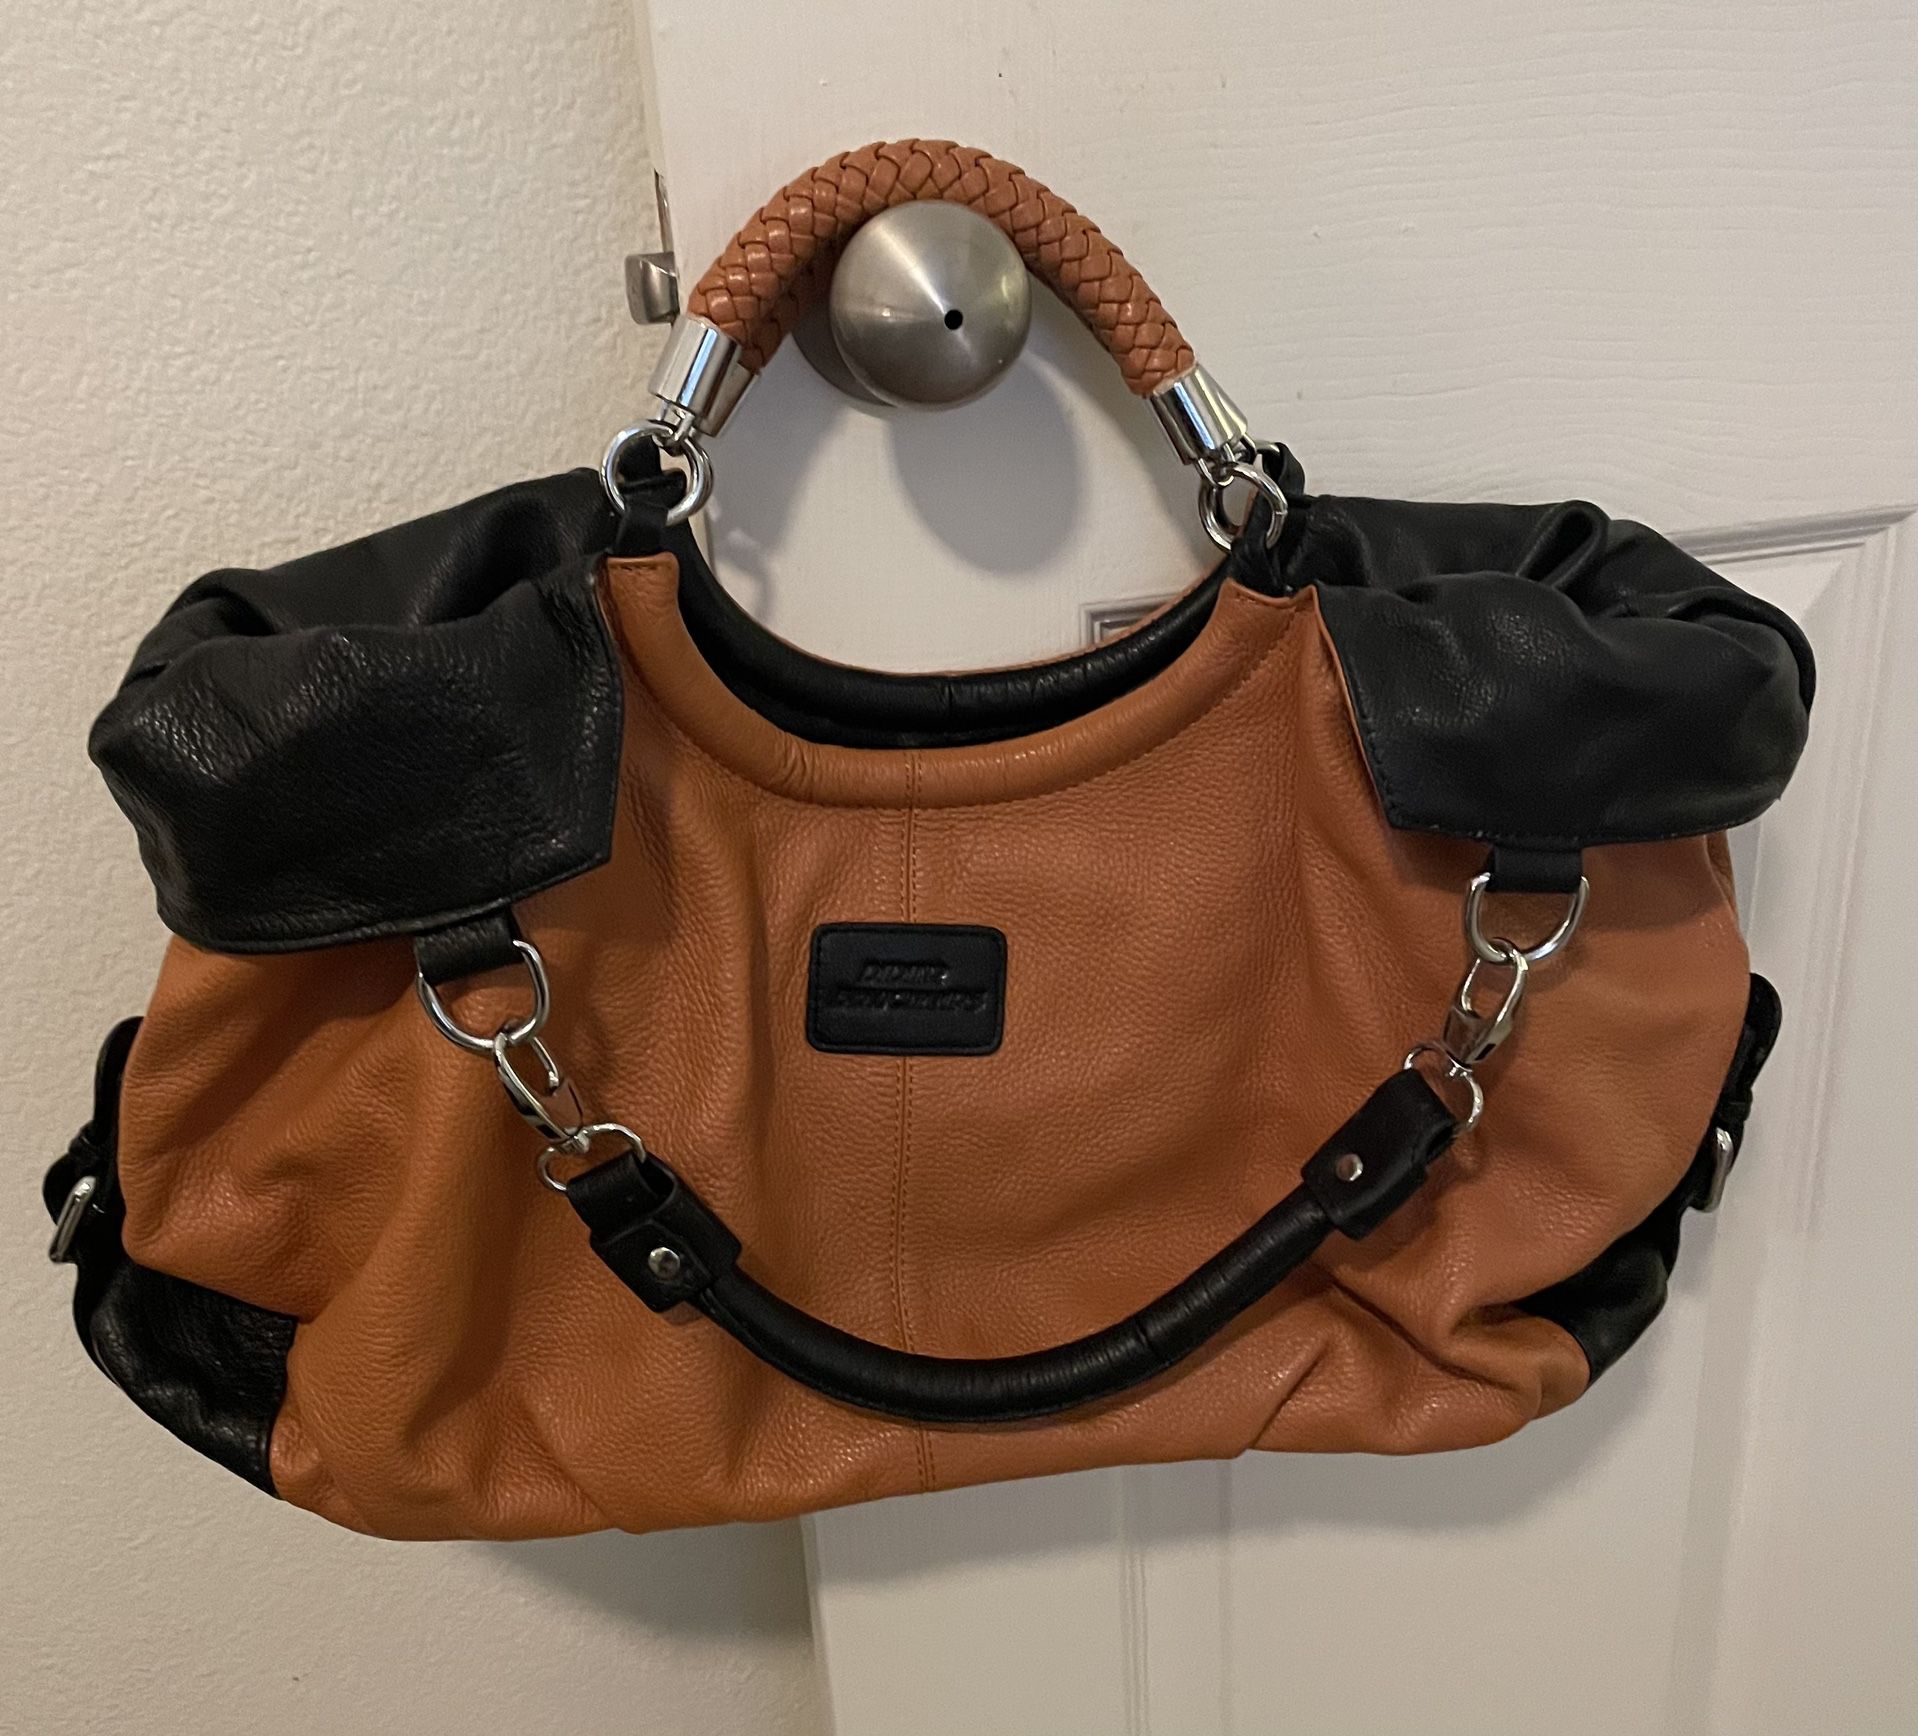 Leather Purse (Top Quality Leather)